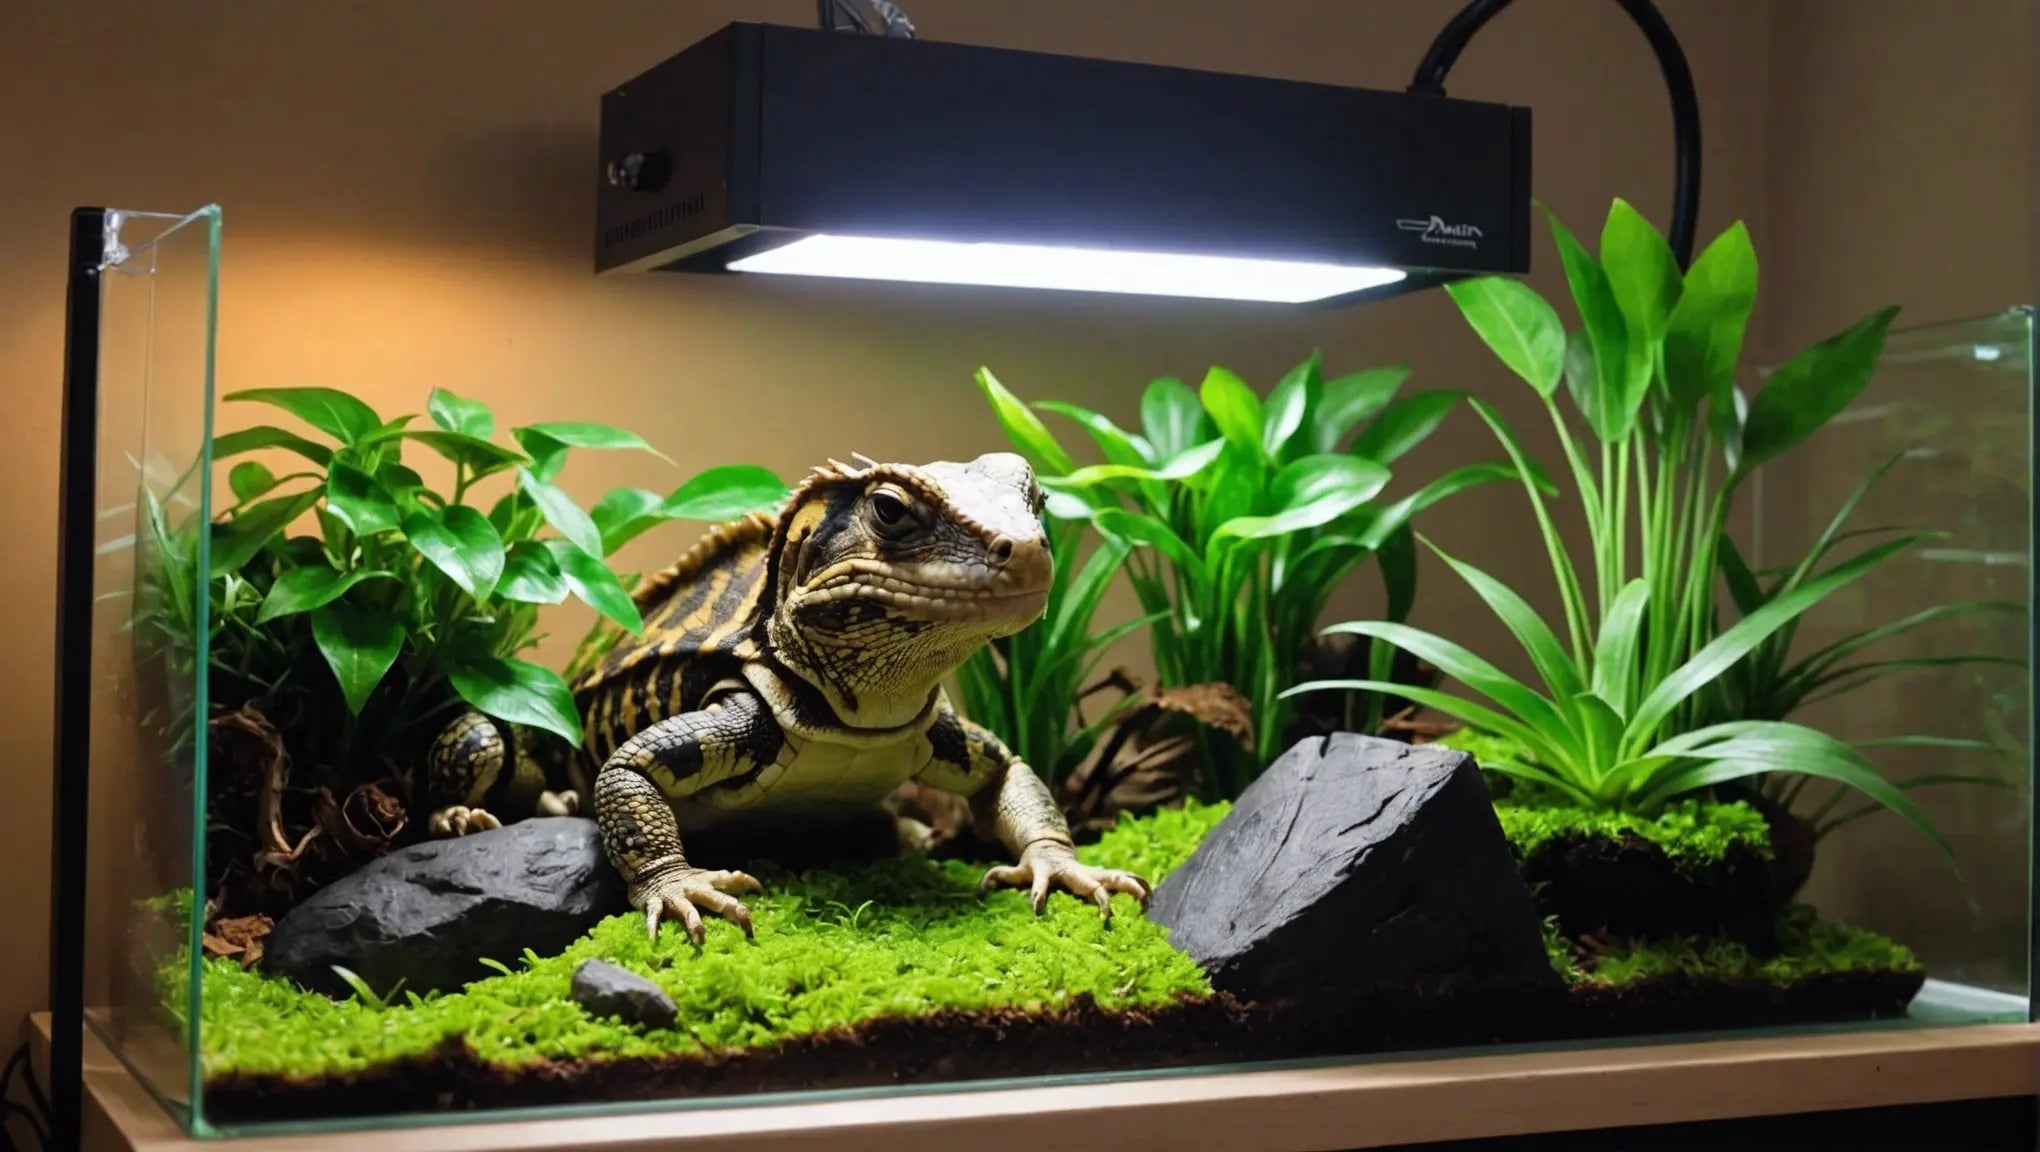 Ensure Proper Lighting for Your Reptile with Reptile Hoods